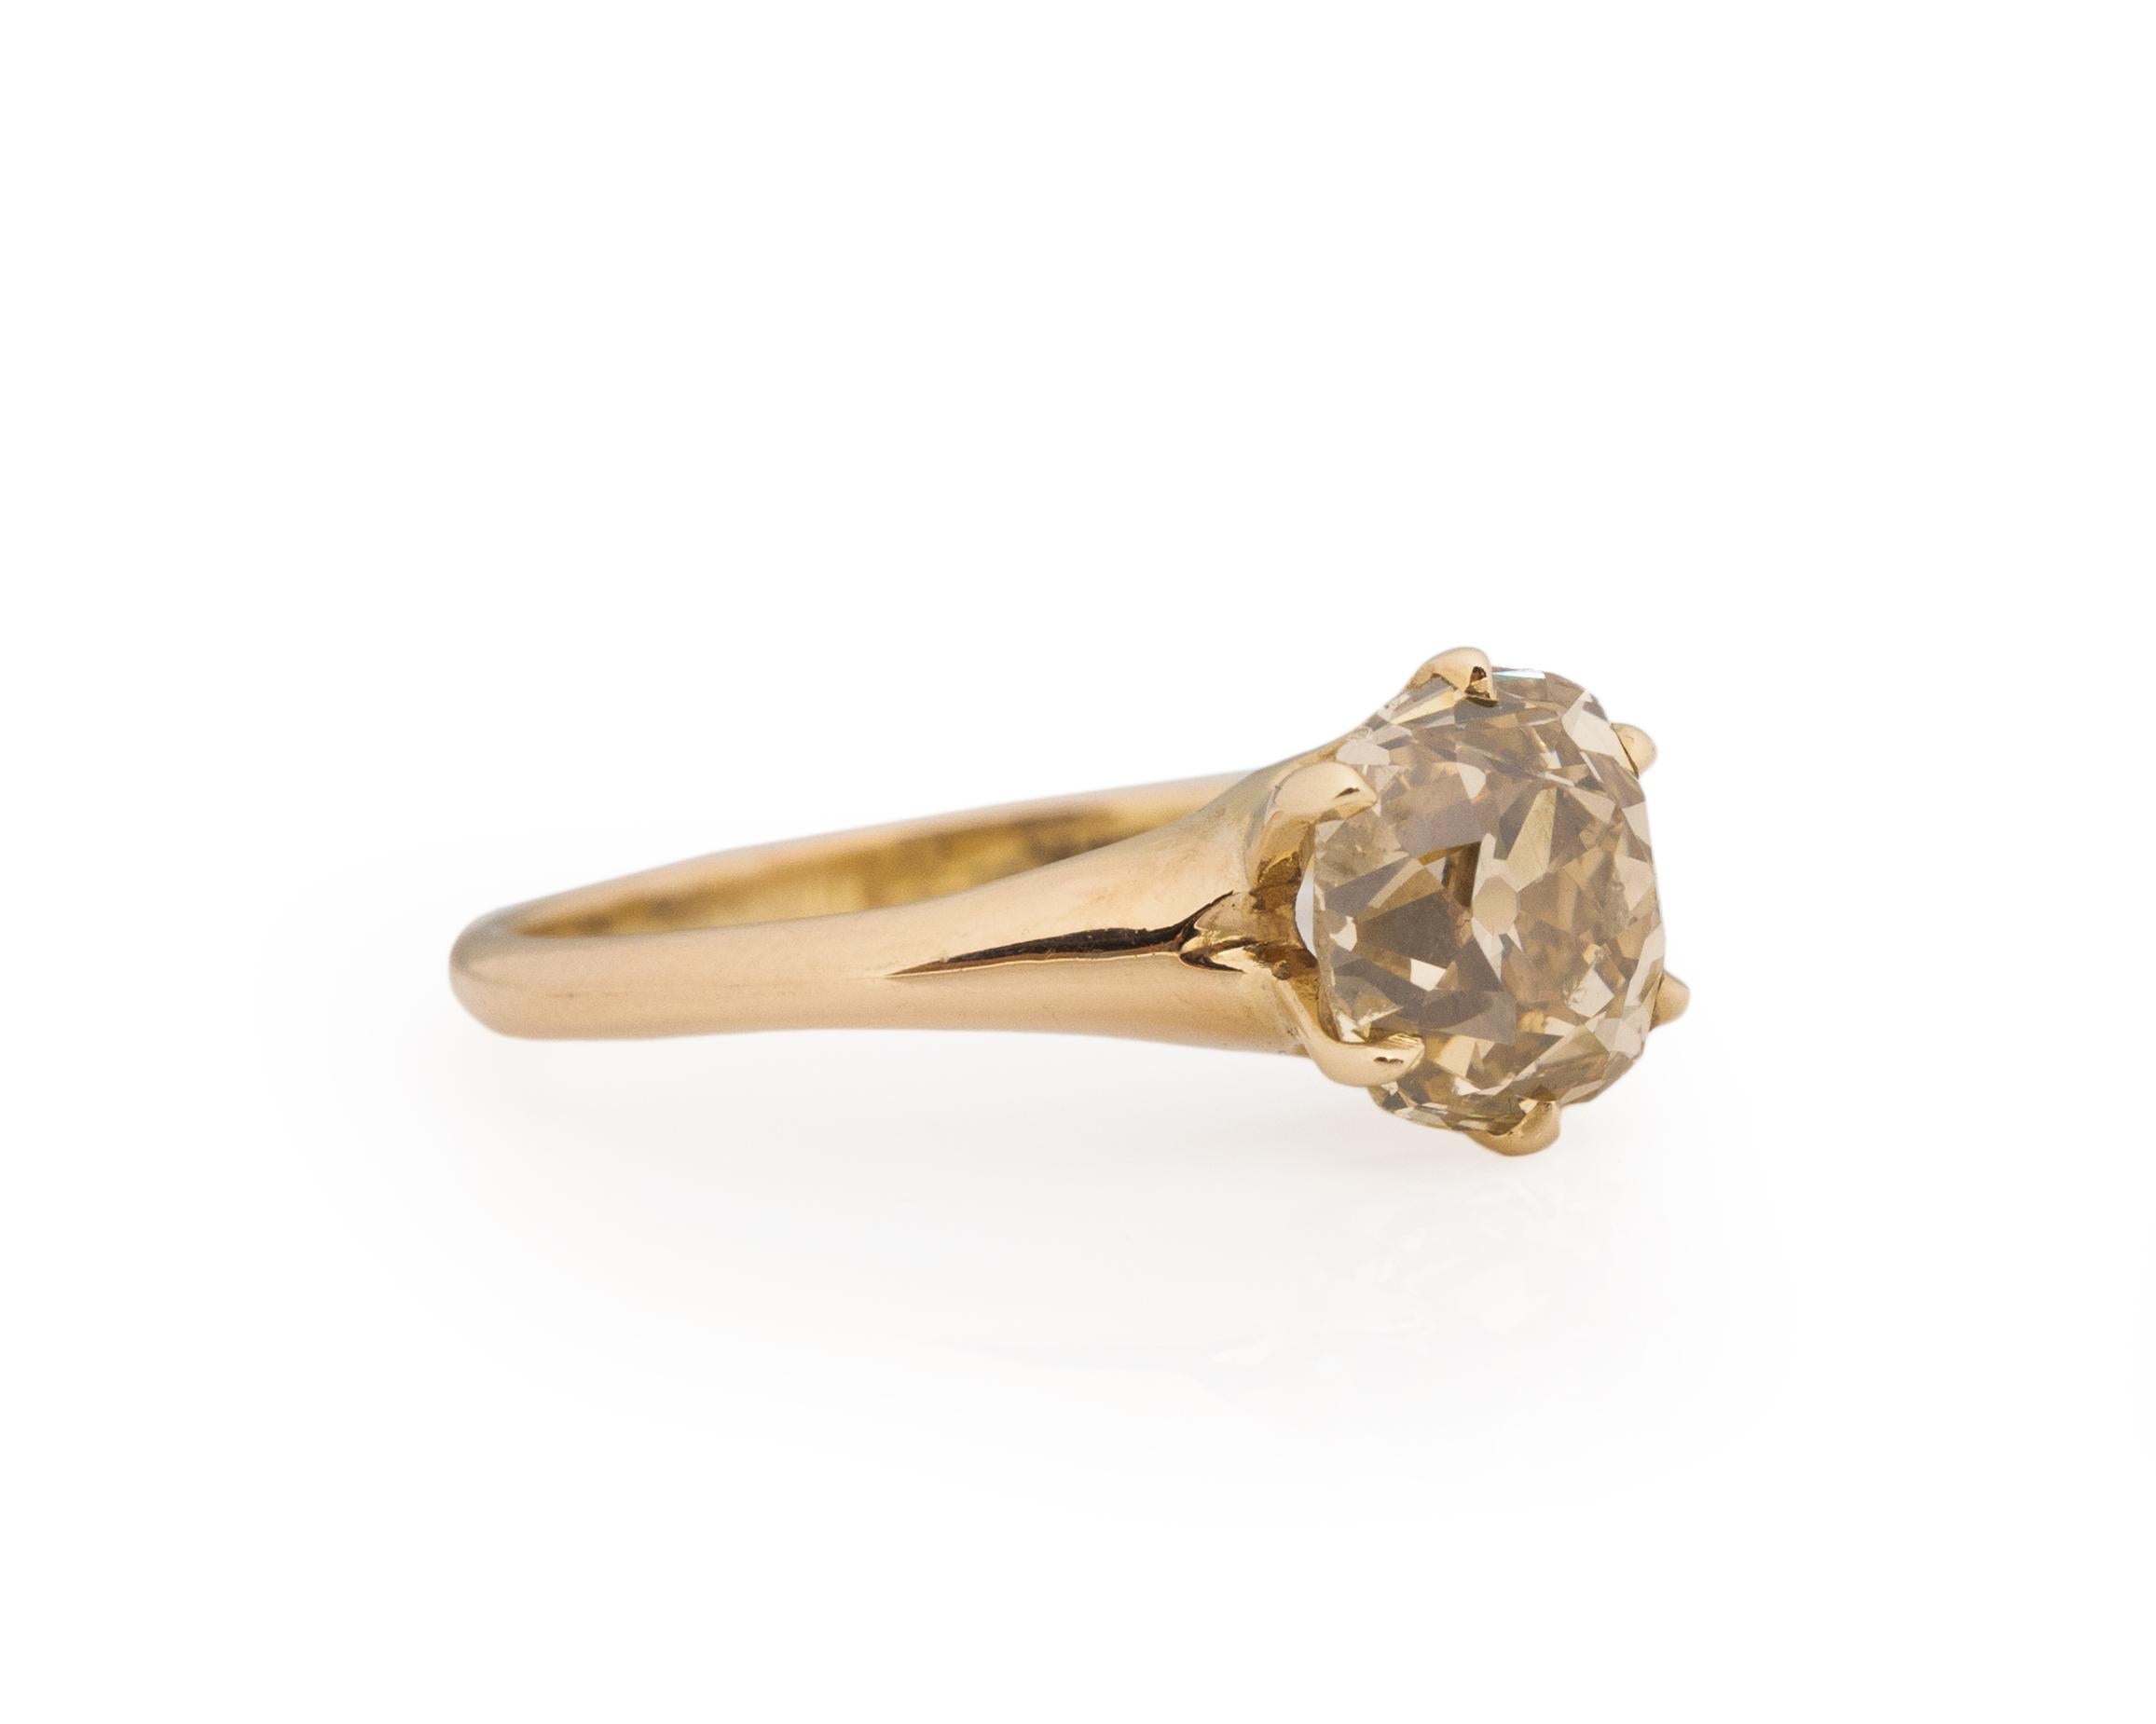 Ring Size: 5
Metal Type: 14K Yellow Gold [Hallmarked, and Tested]
Weight: 3.0 grams

Center Diamond Details:
GIA REPORT #: 7413932909
Weight: 1.82ct
Cut: Old Mine brilliant
Color: NATURAL, Fancy Brownish Yellow (Cognac Color)
Clarity: